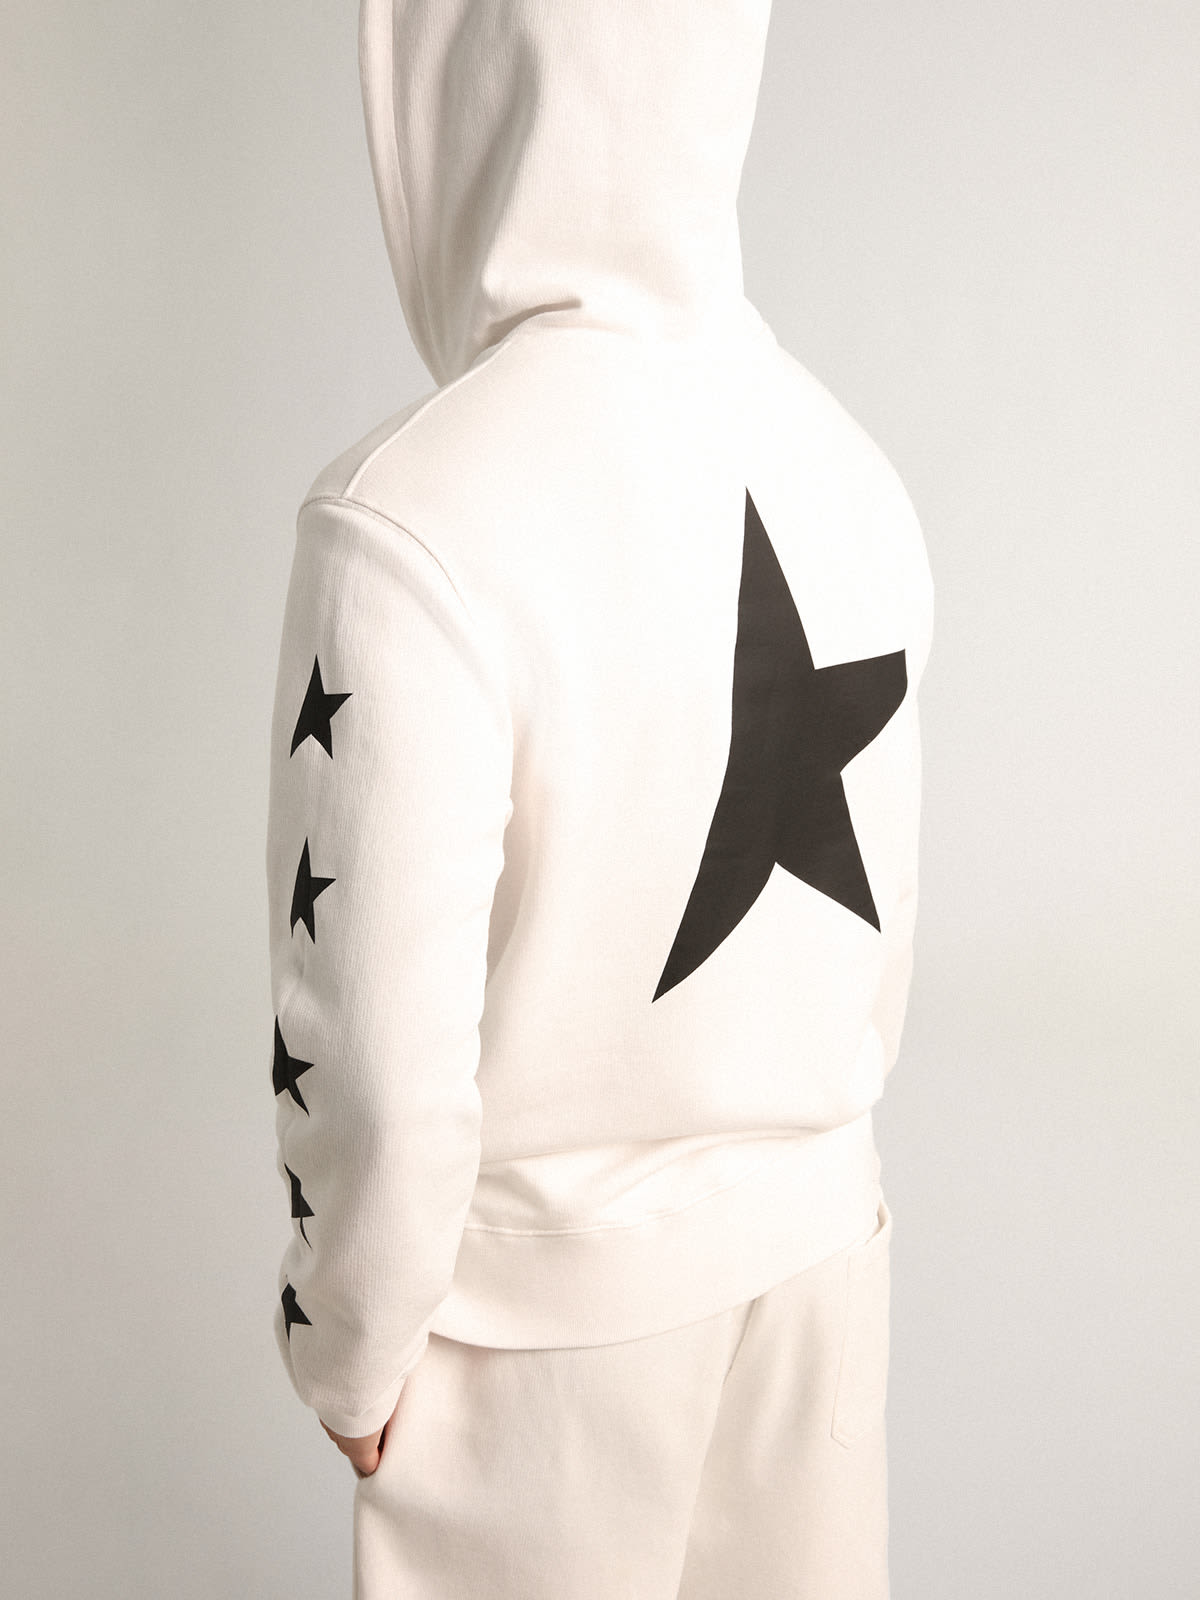 Golden Goose - Alighiero Star Collection hooded sweatshirt in vintage white with contrasting black stars in 